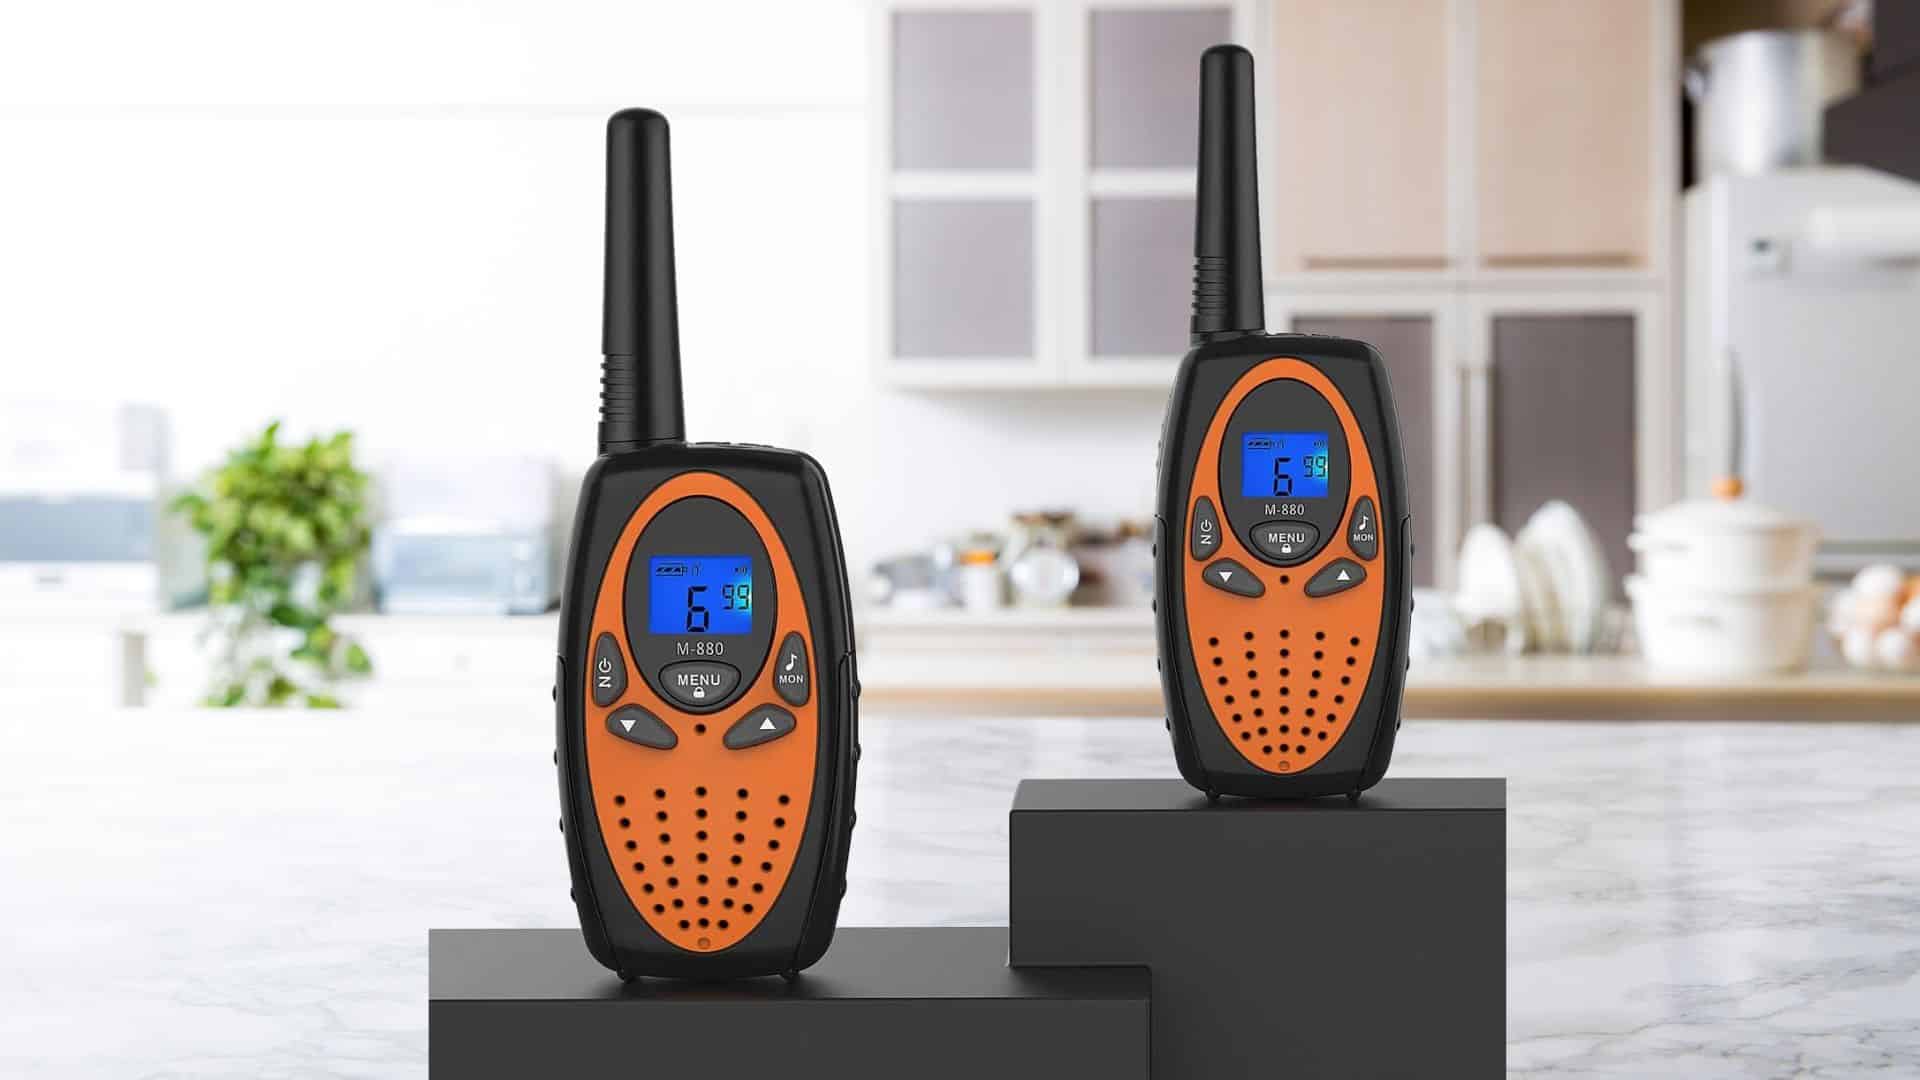 Topsung M880 FRS Walkie-Talkies on a kitchen counter